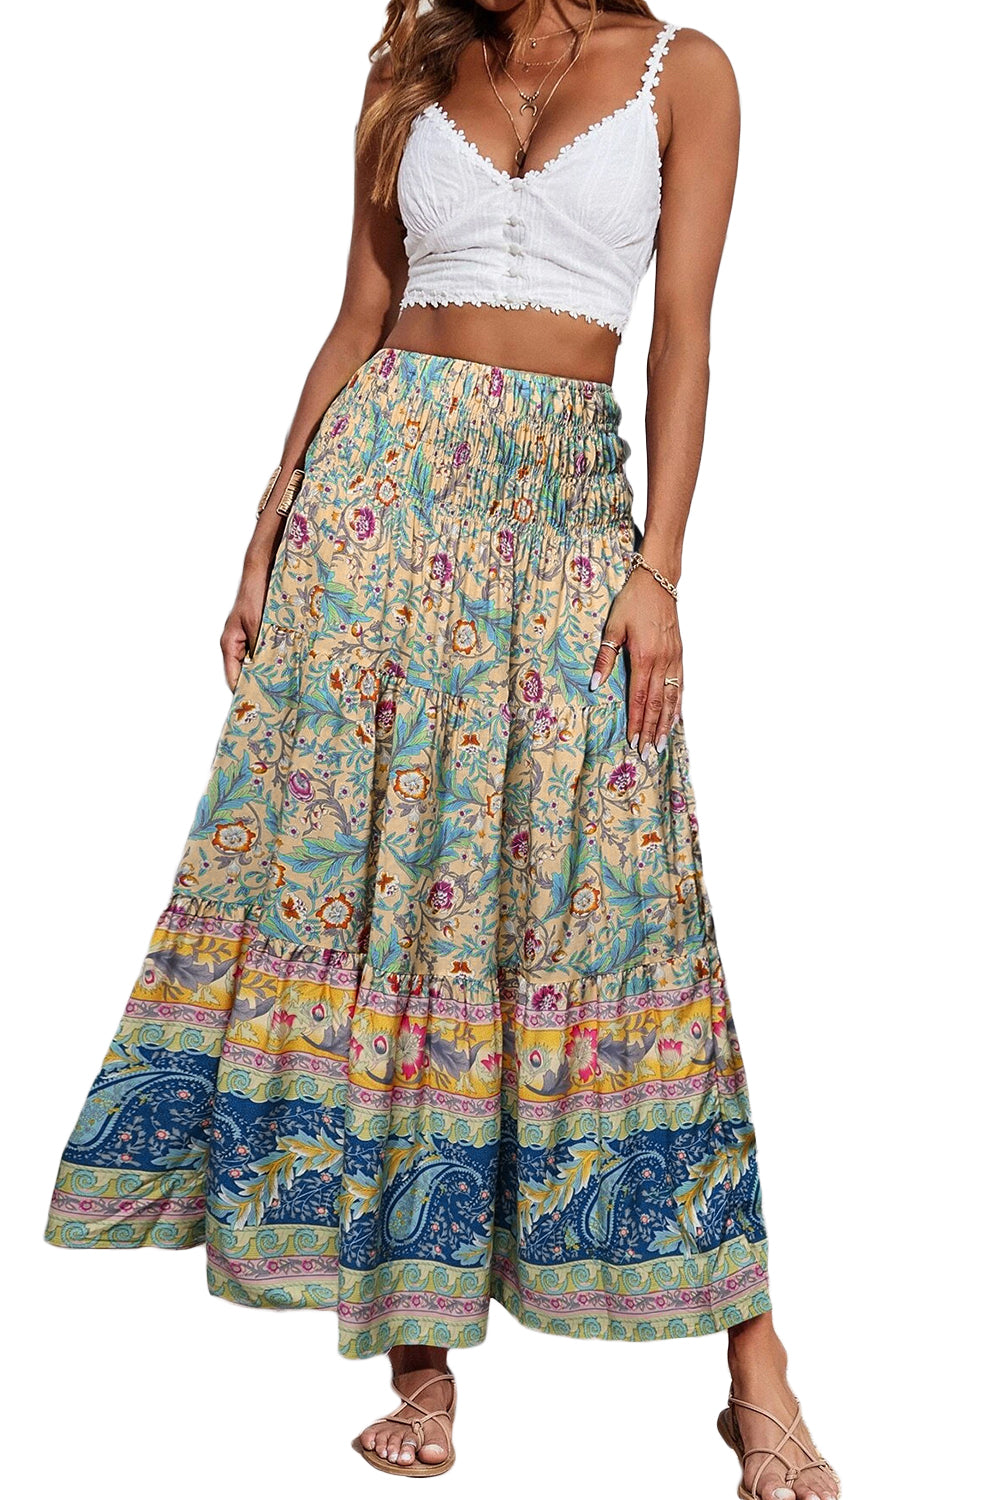 Colorful boho maxi skirt with an elastic waist and vibrant floral designs